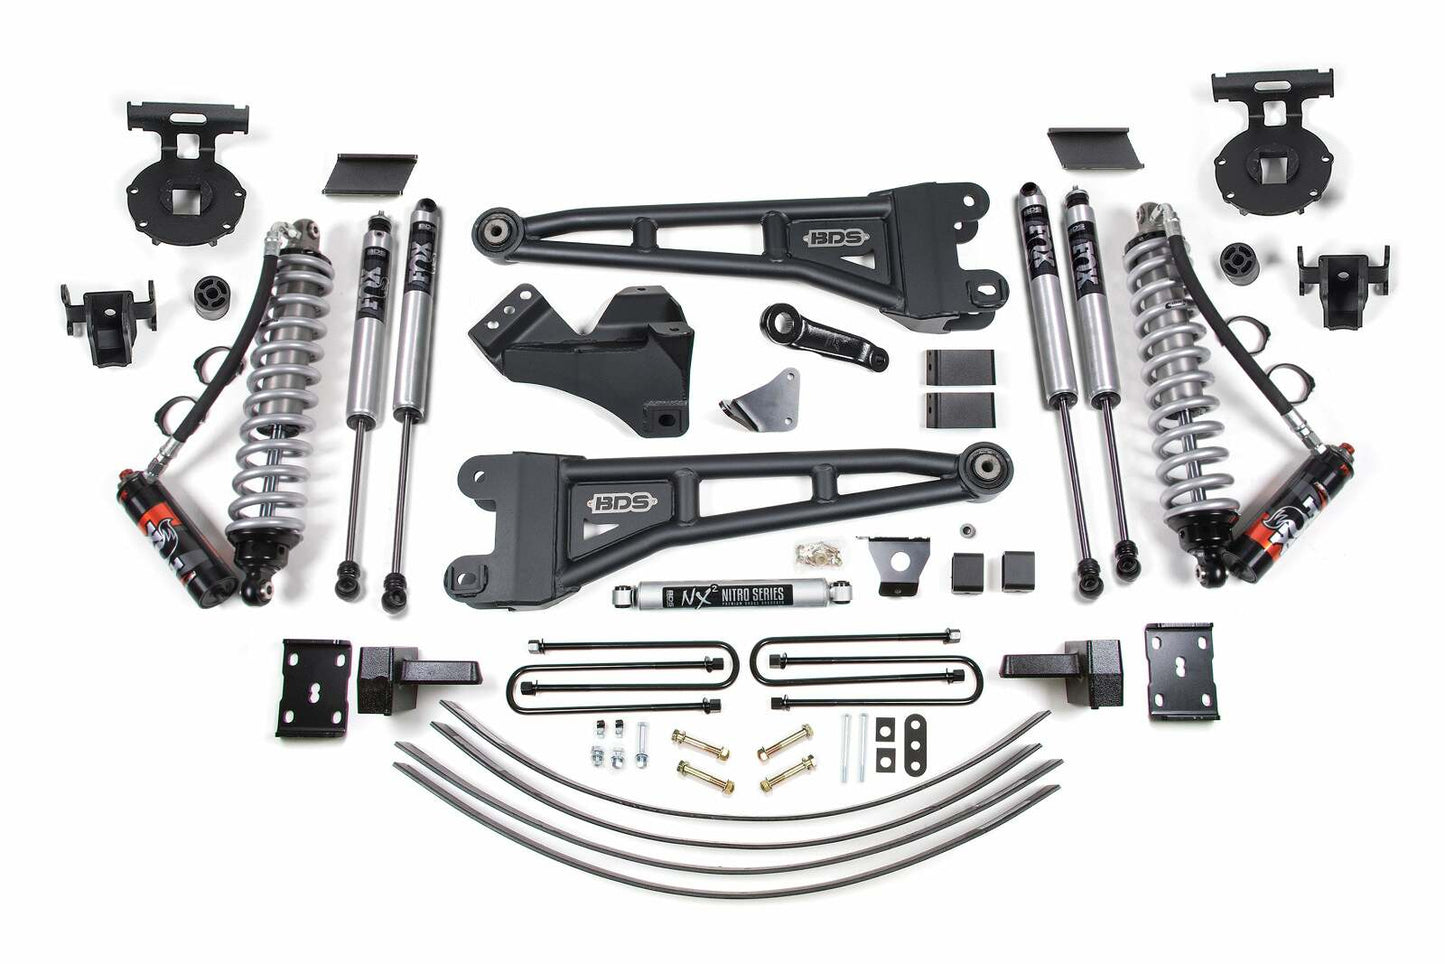 2005-2007 Ford F250/F350 4wd 6" Radius Arm Suspension Lift Kit, 6" Rear Lift, Spring, Diesel - Fox 2.5 PES C/O Front, Fox 2.0 IFP PS Aux Front, Fox 2.0 IFP PS Rear